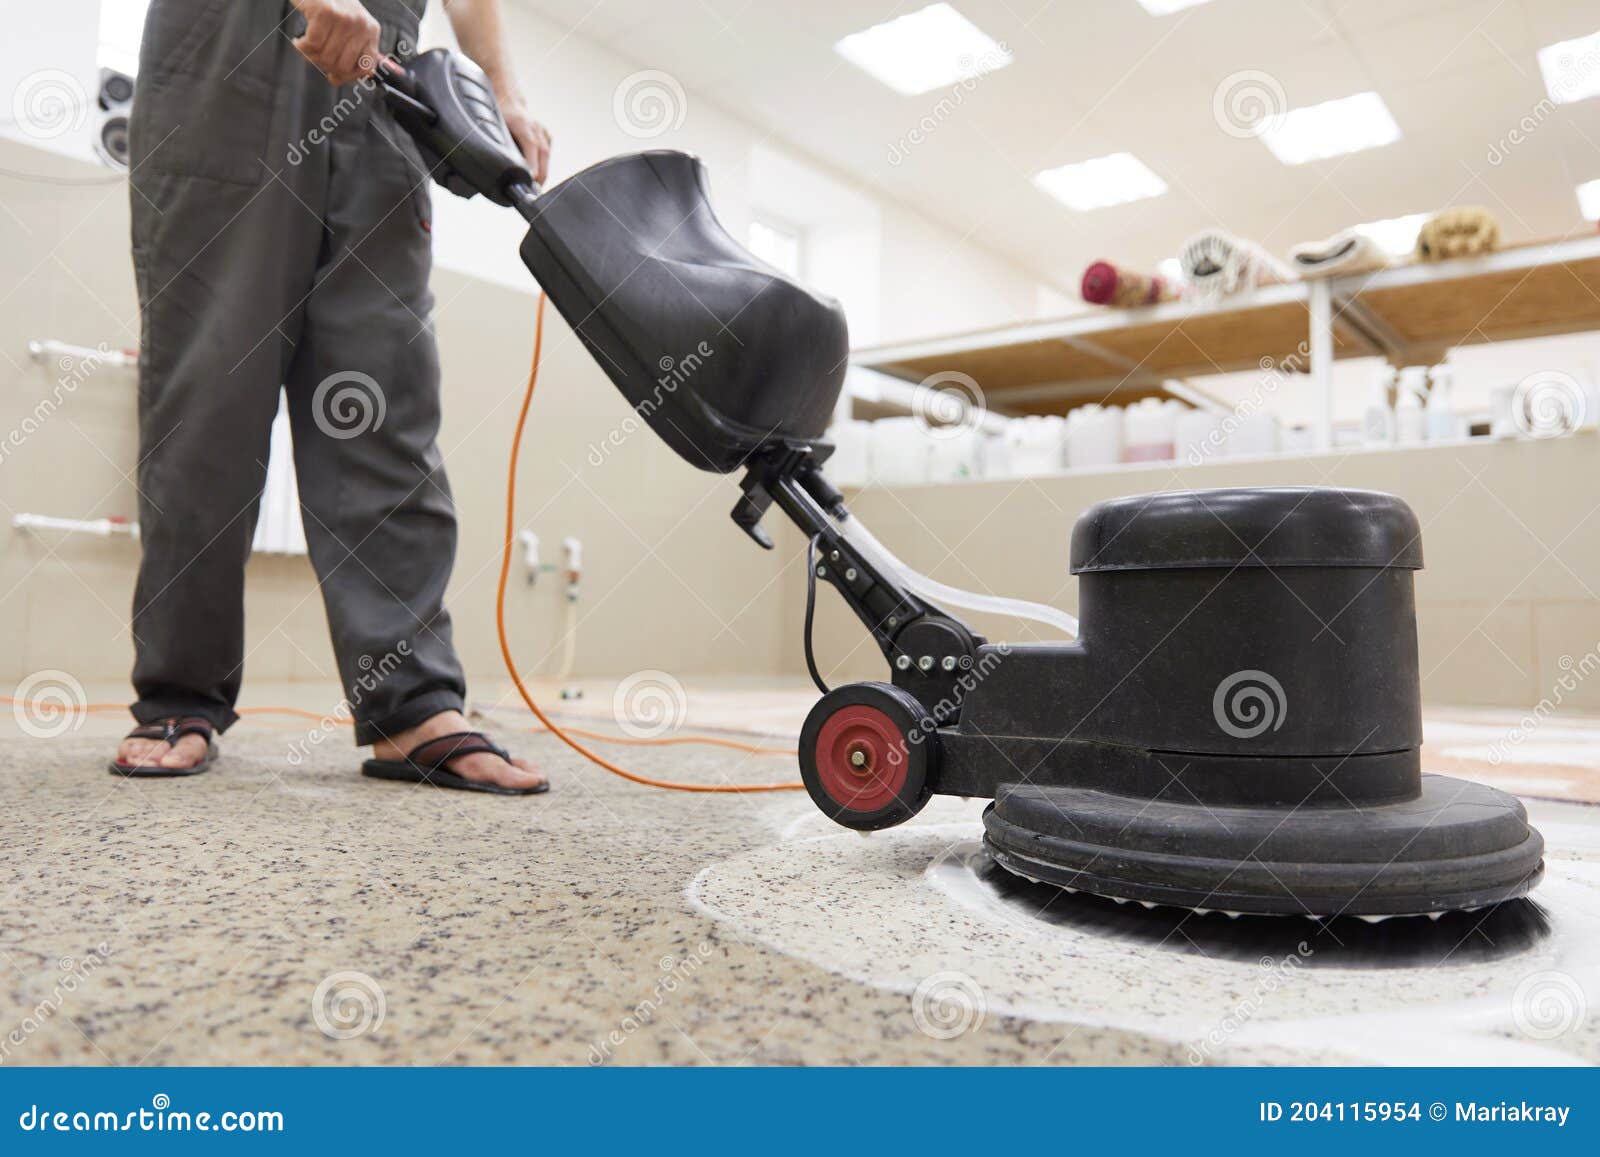 carpet chemical cleaning with professionally disk machine. early spring cleaning or regular clean up.